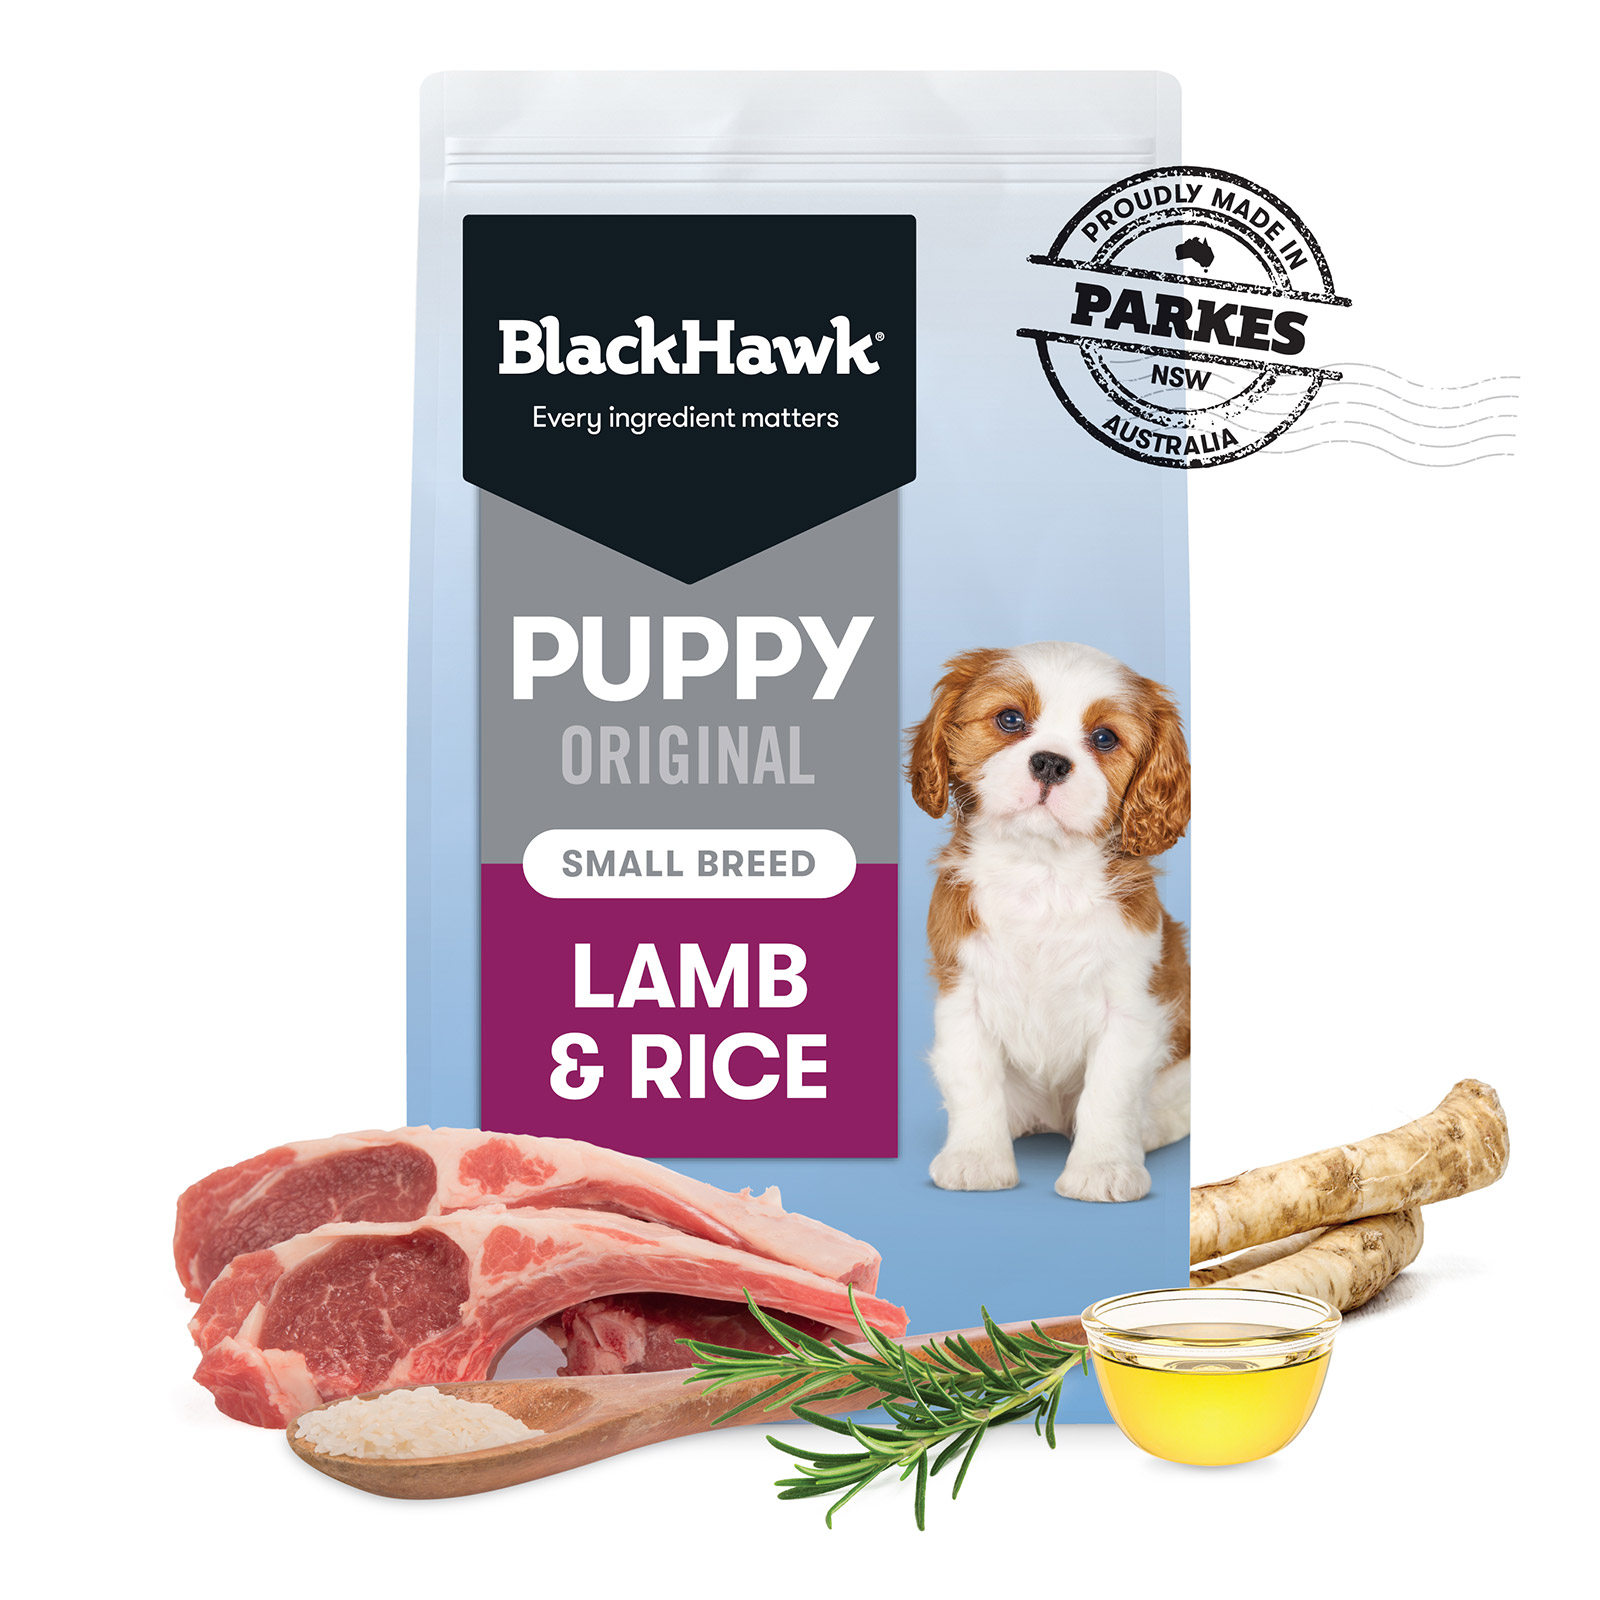 Black Hawk Puppy Original Small Breed Lamb and Rice for Food